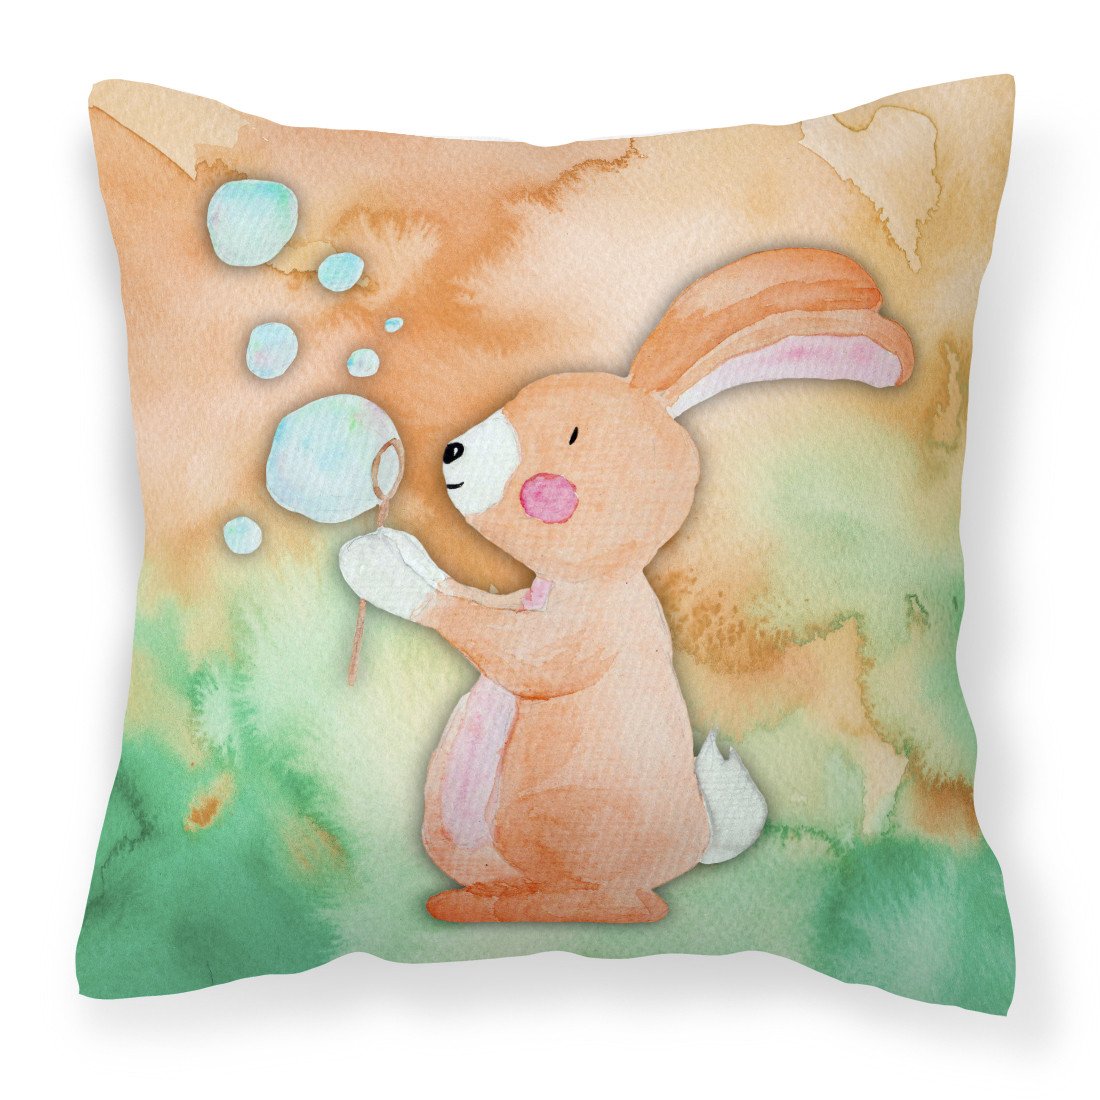 Rabbit and Bubbles Watercolor Fabric Decorative Pillow BB7349PW1818 by Caroline's Treasures